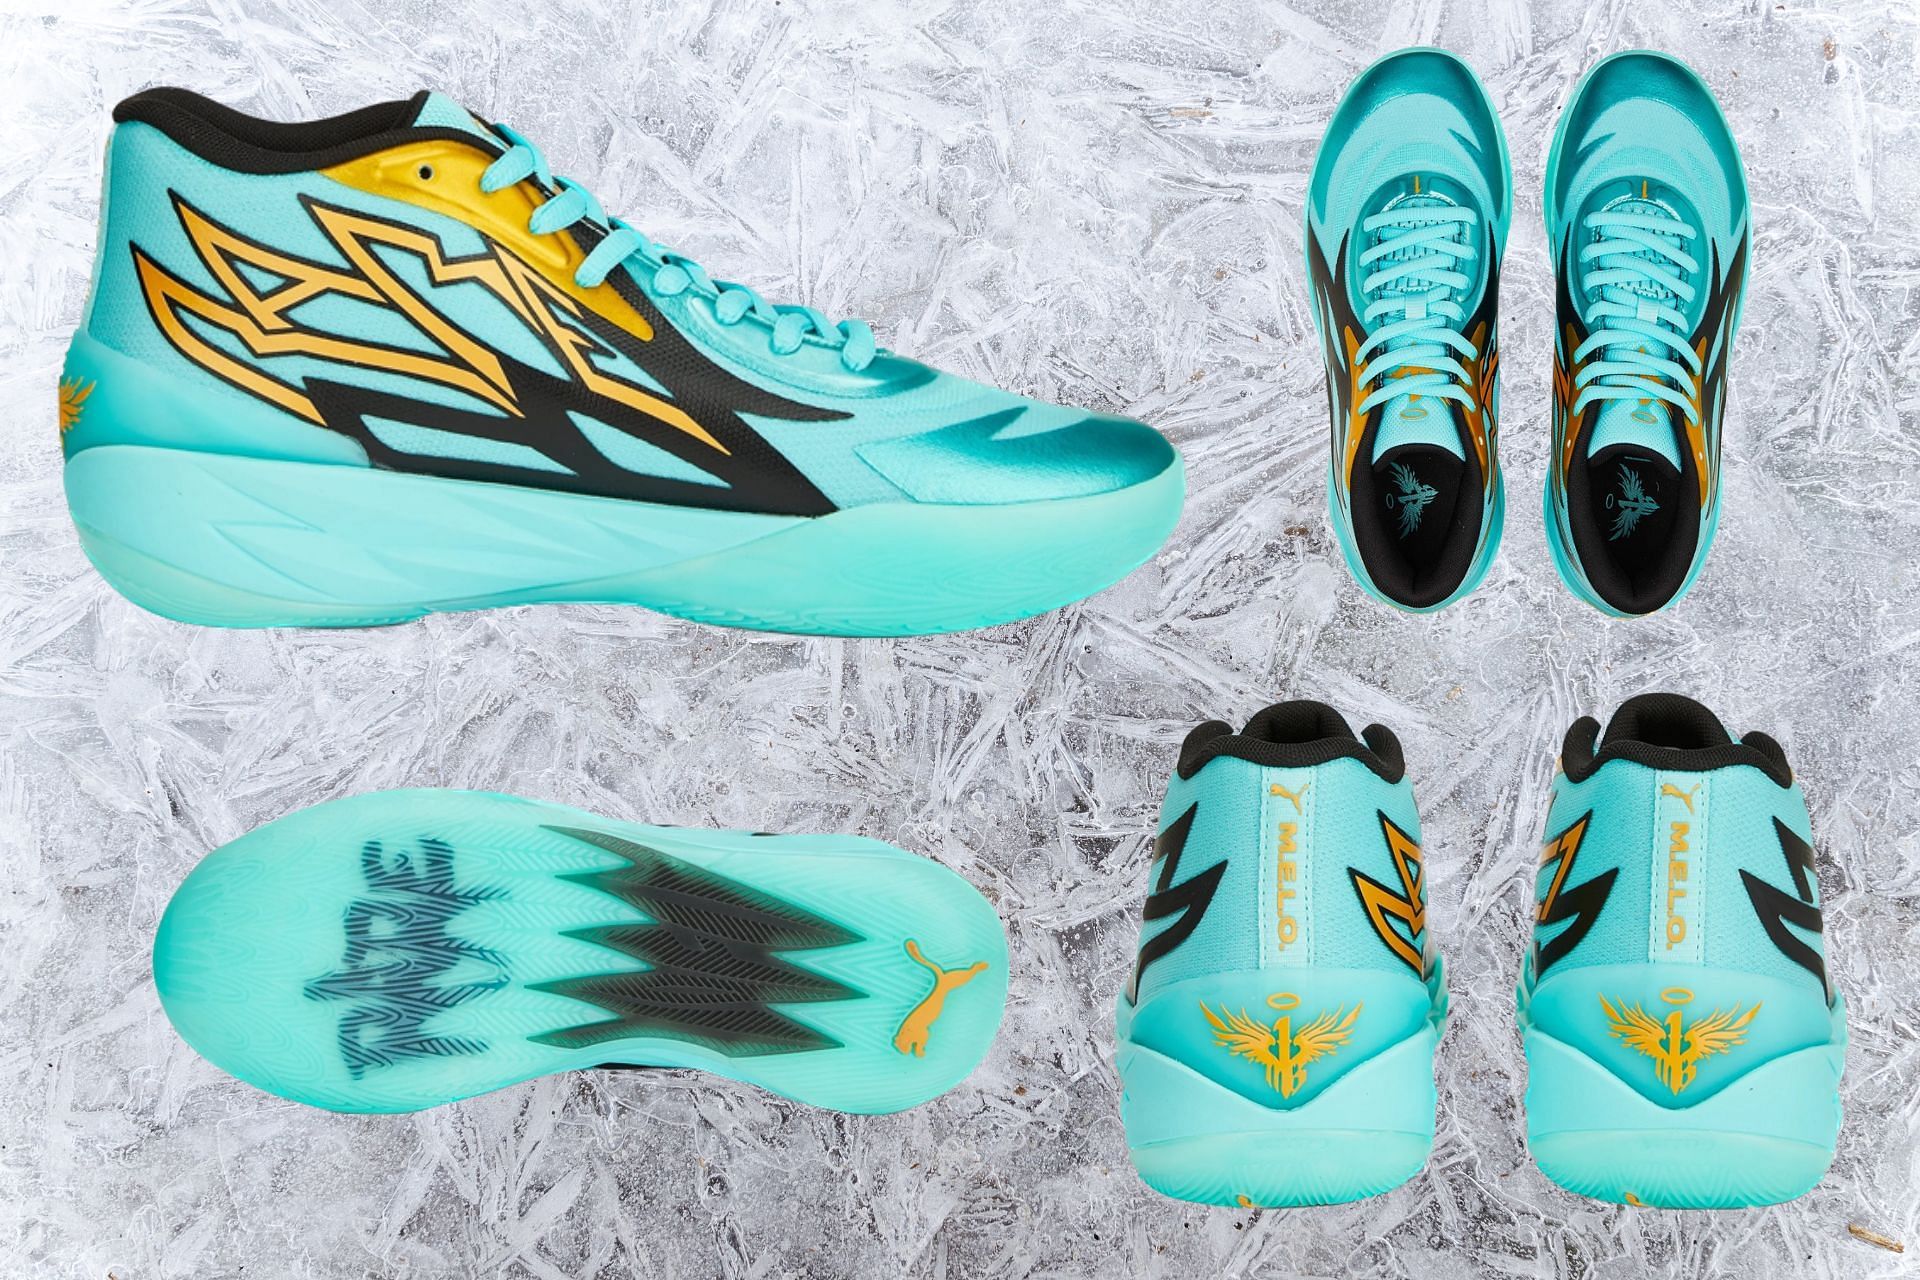 LaMelo Ball LaMelo Ball’s Puma MB.02 “Teal” shoes Where to buy, price